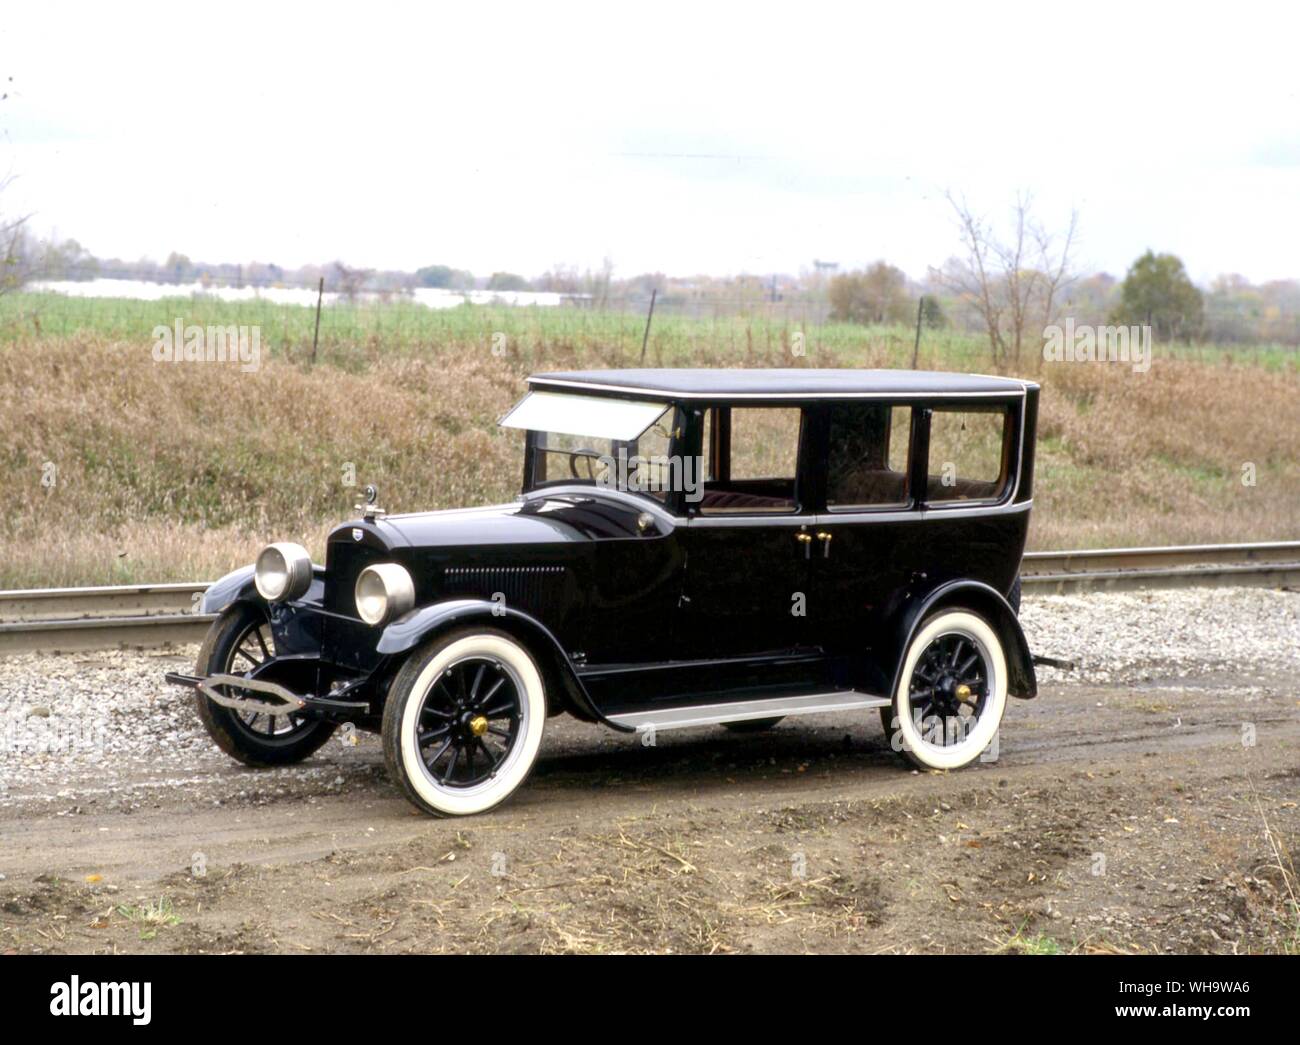 1923 Auburn Beauty-Six Formal Sedan displays the lack of style which hampered sales Stock Photo